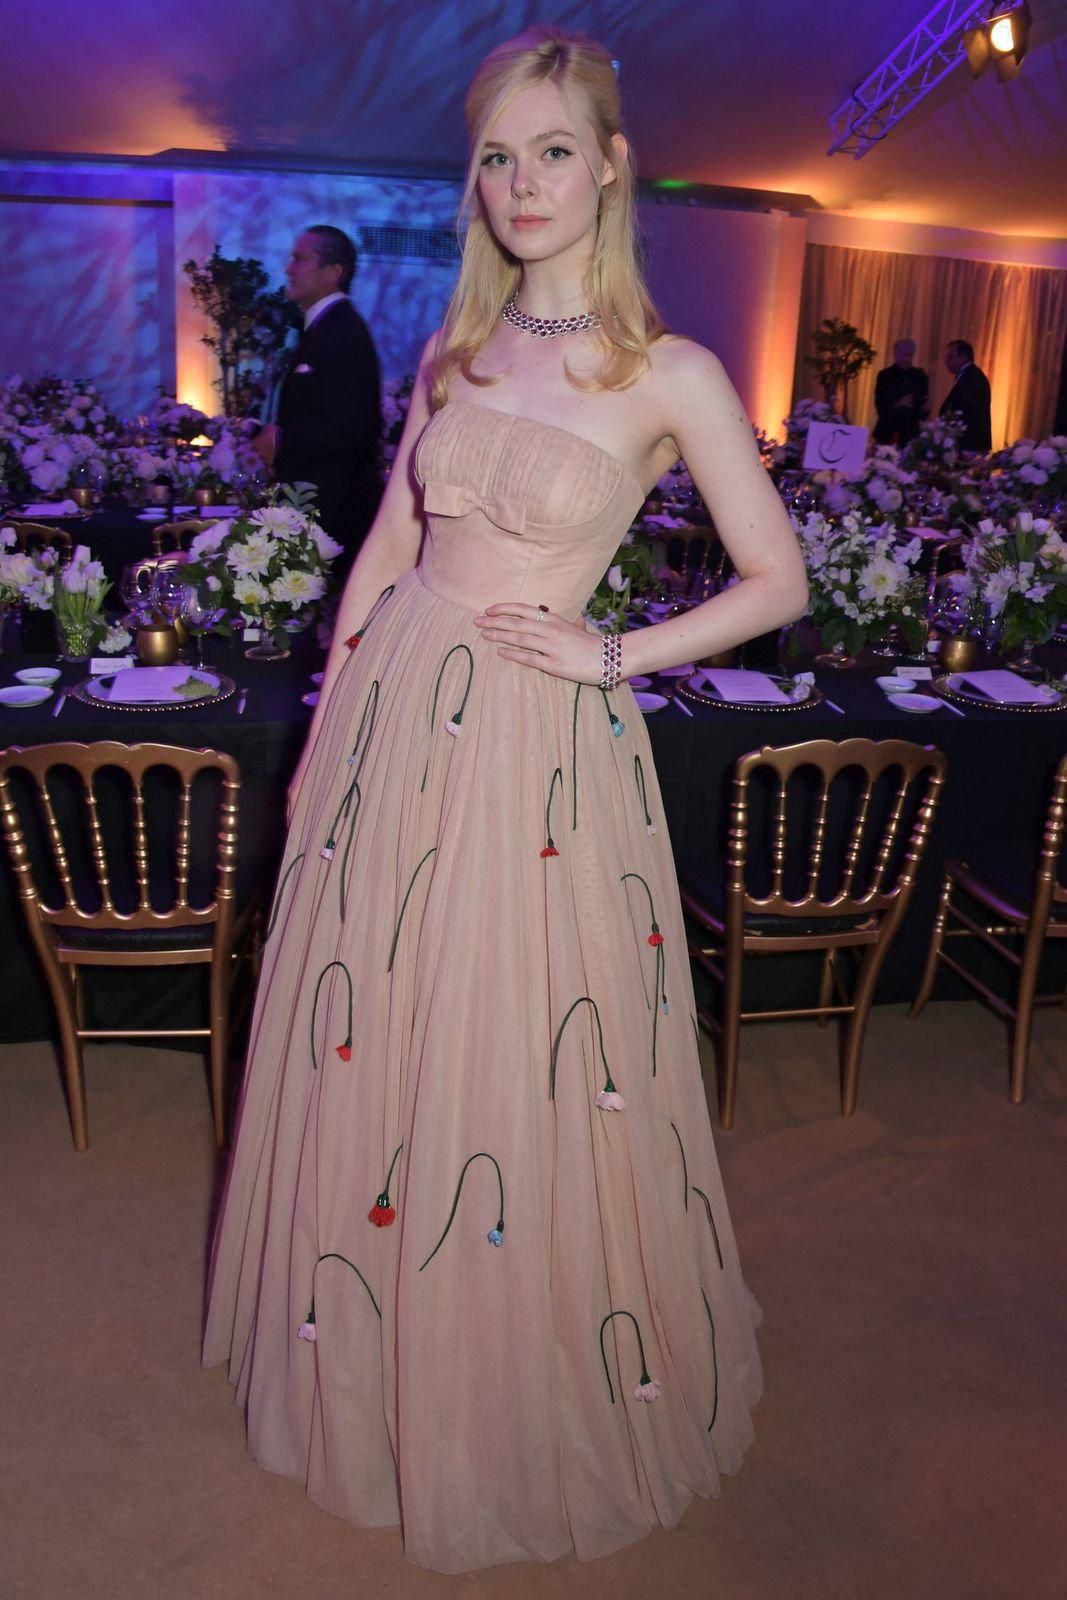 elle fanning attends the official trophee chopard dinner as news photo 1145311755 1558454478